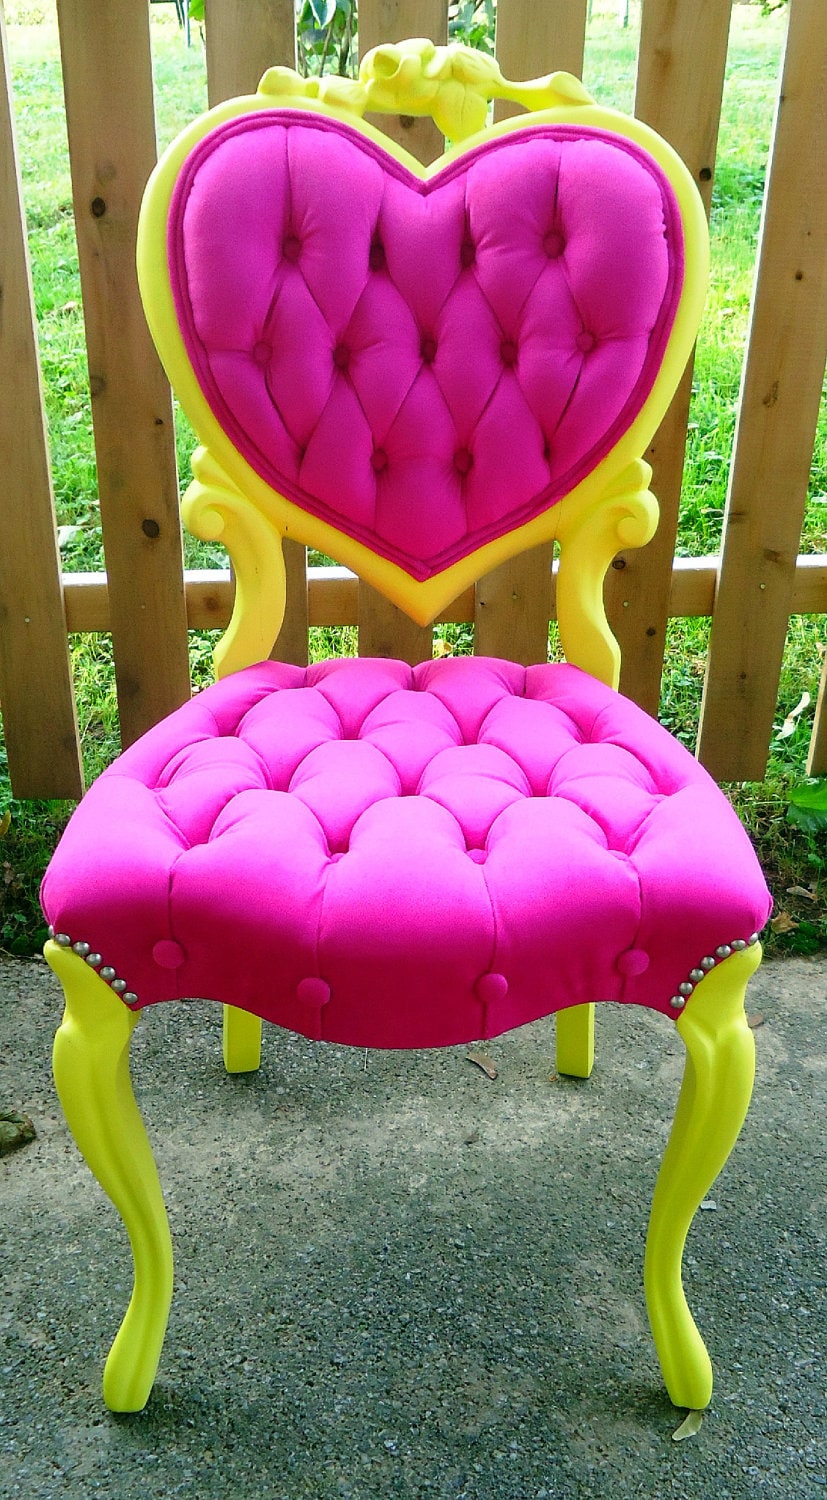 Velvet Tufted Antique Victorian Heart Back Chair Upcycled